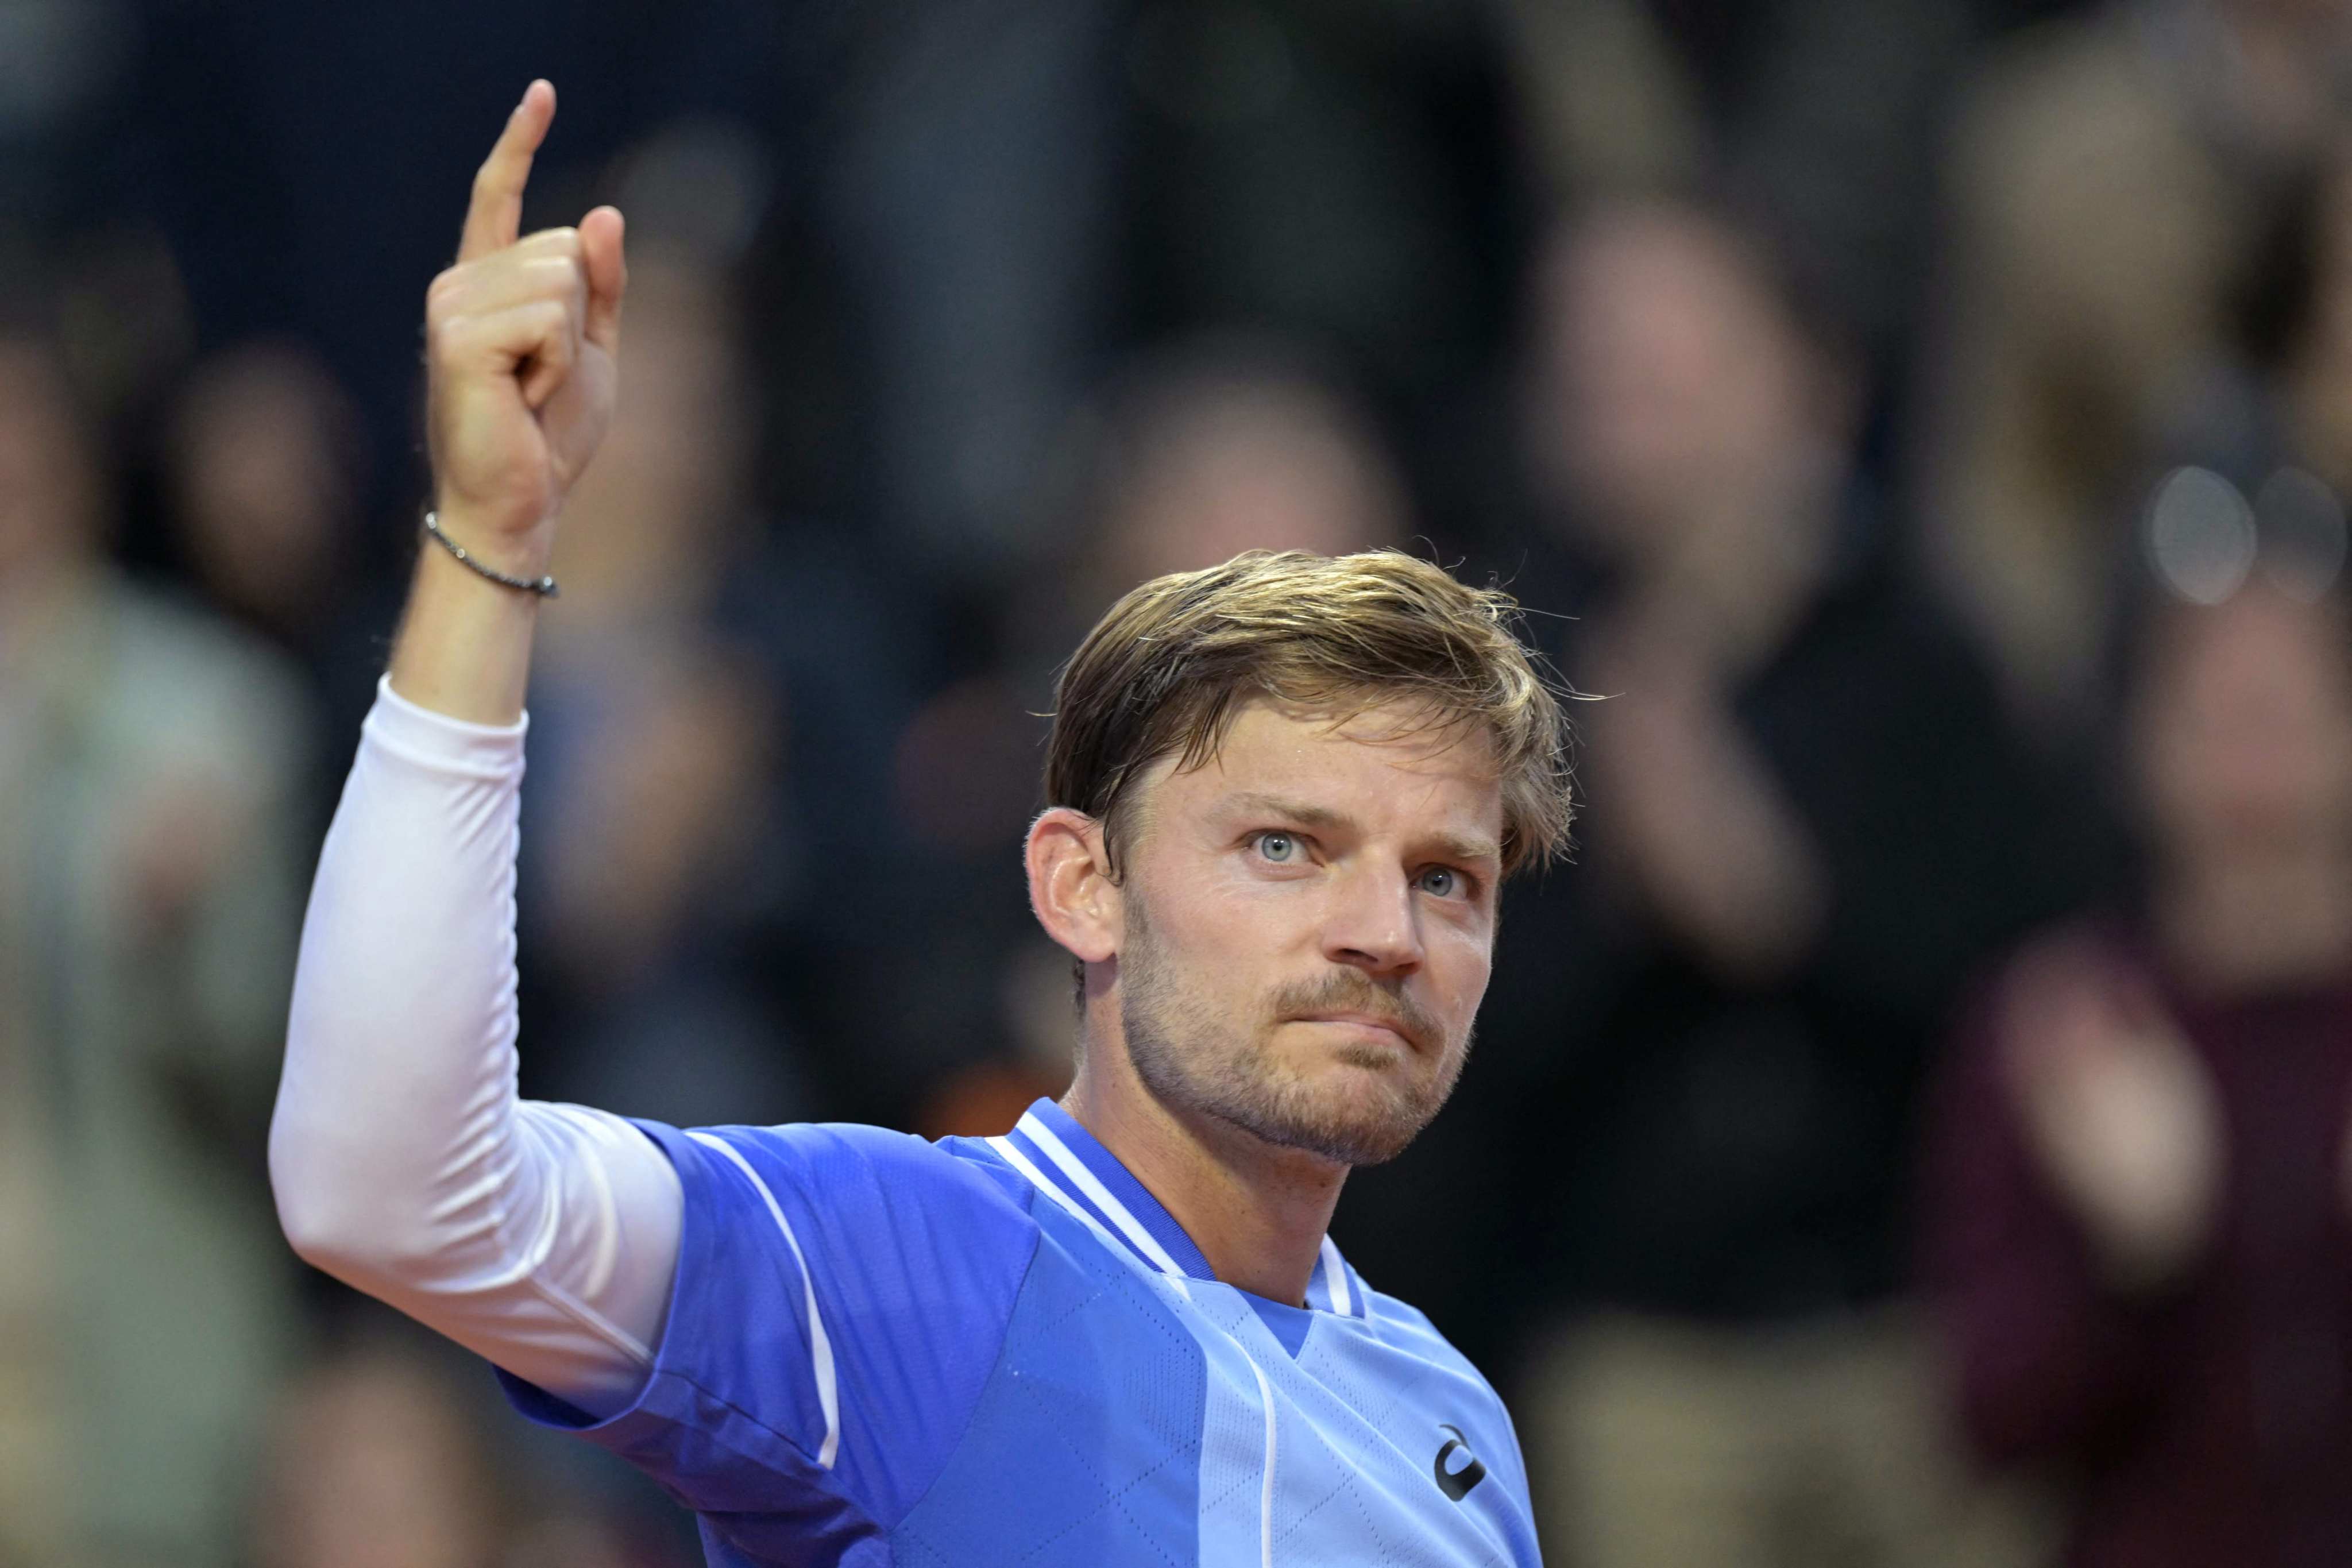 Belgium’s David Goffin says tennis is becoming like football: “soon there will be smoke bombs, hooligans and there will be fights in the stands”. Photo: AFP